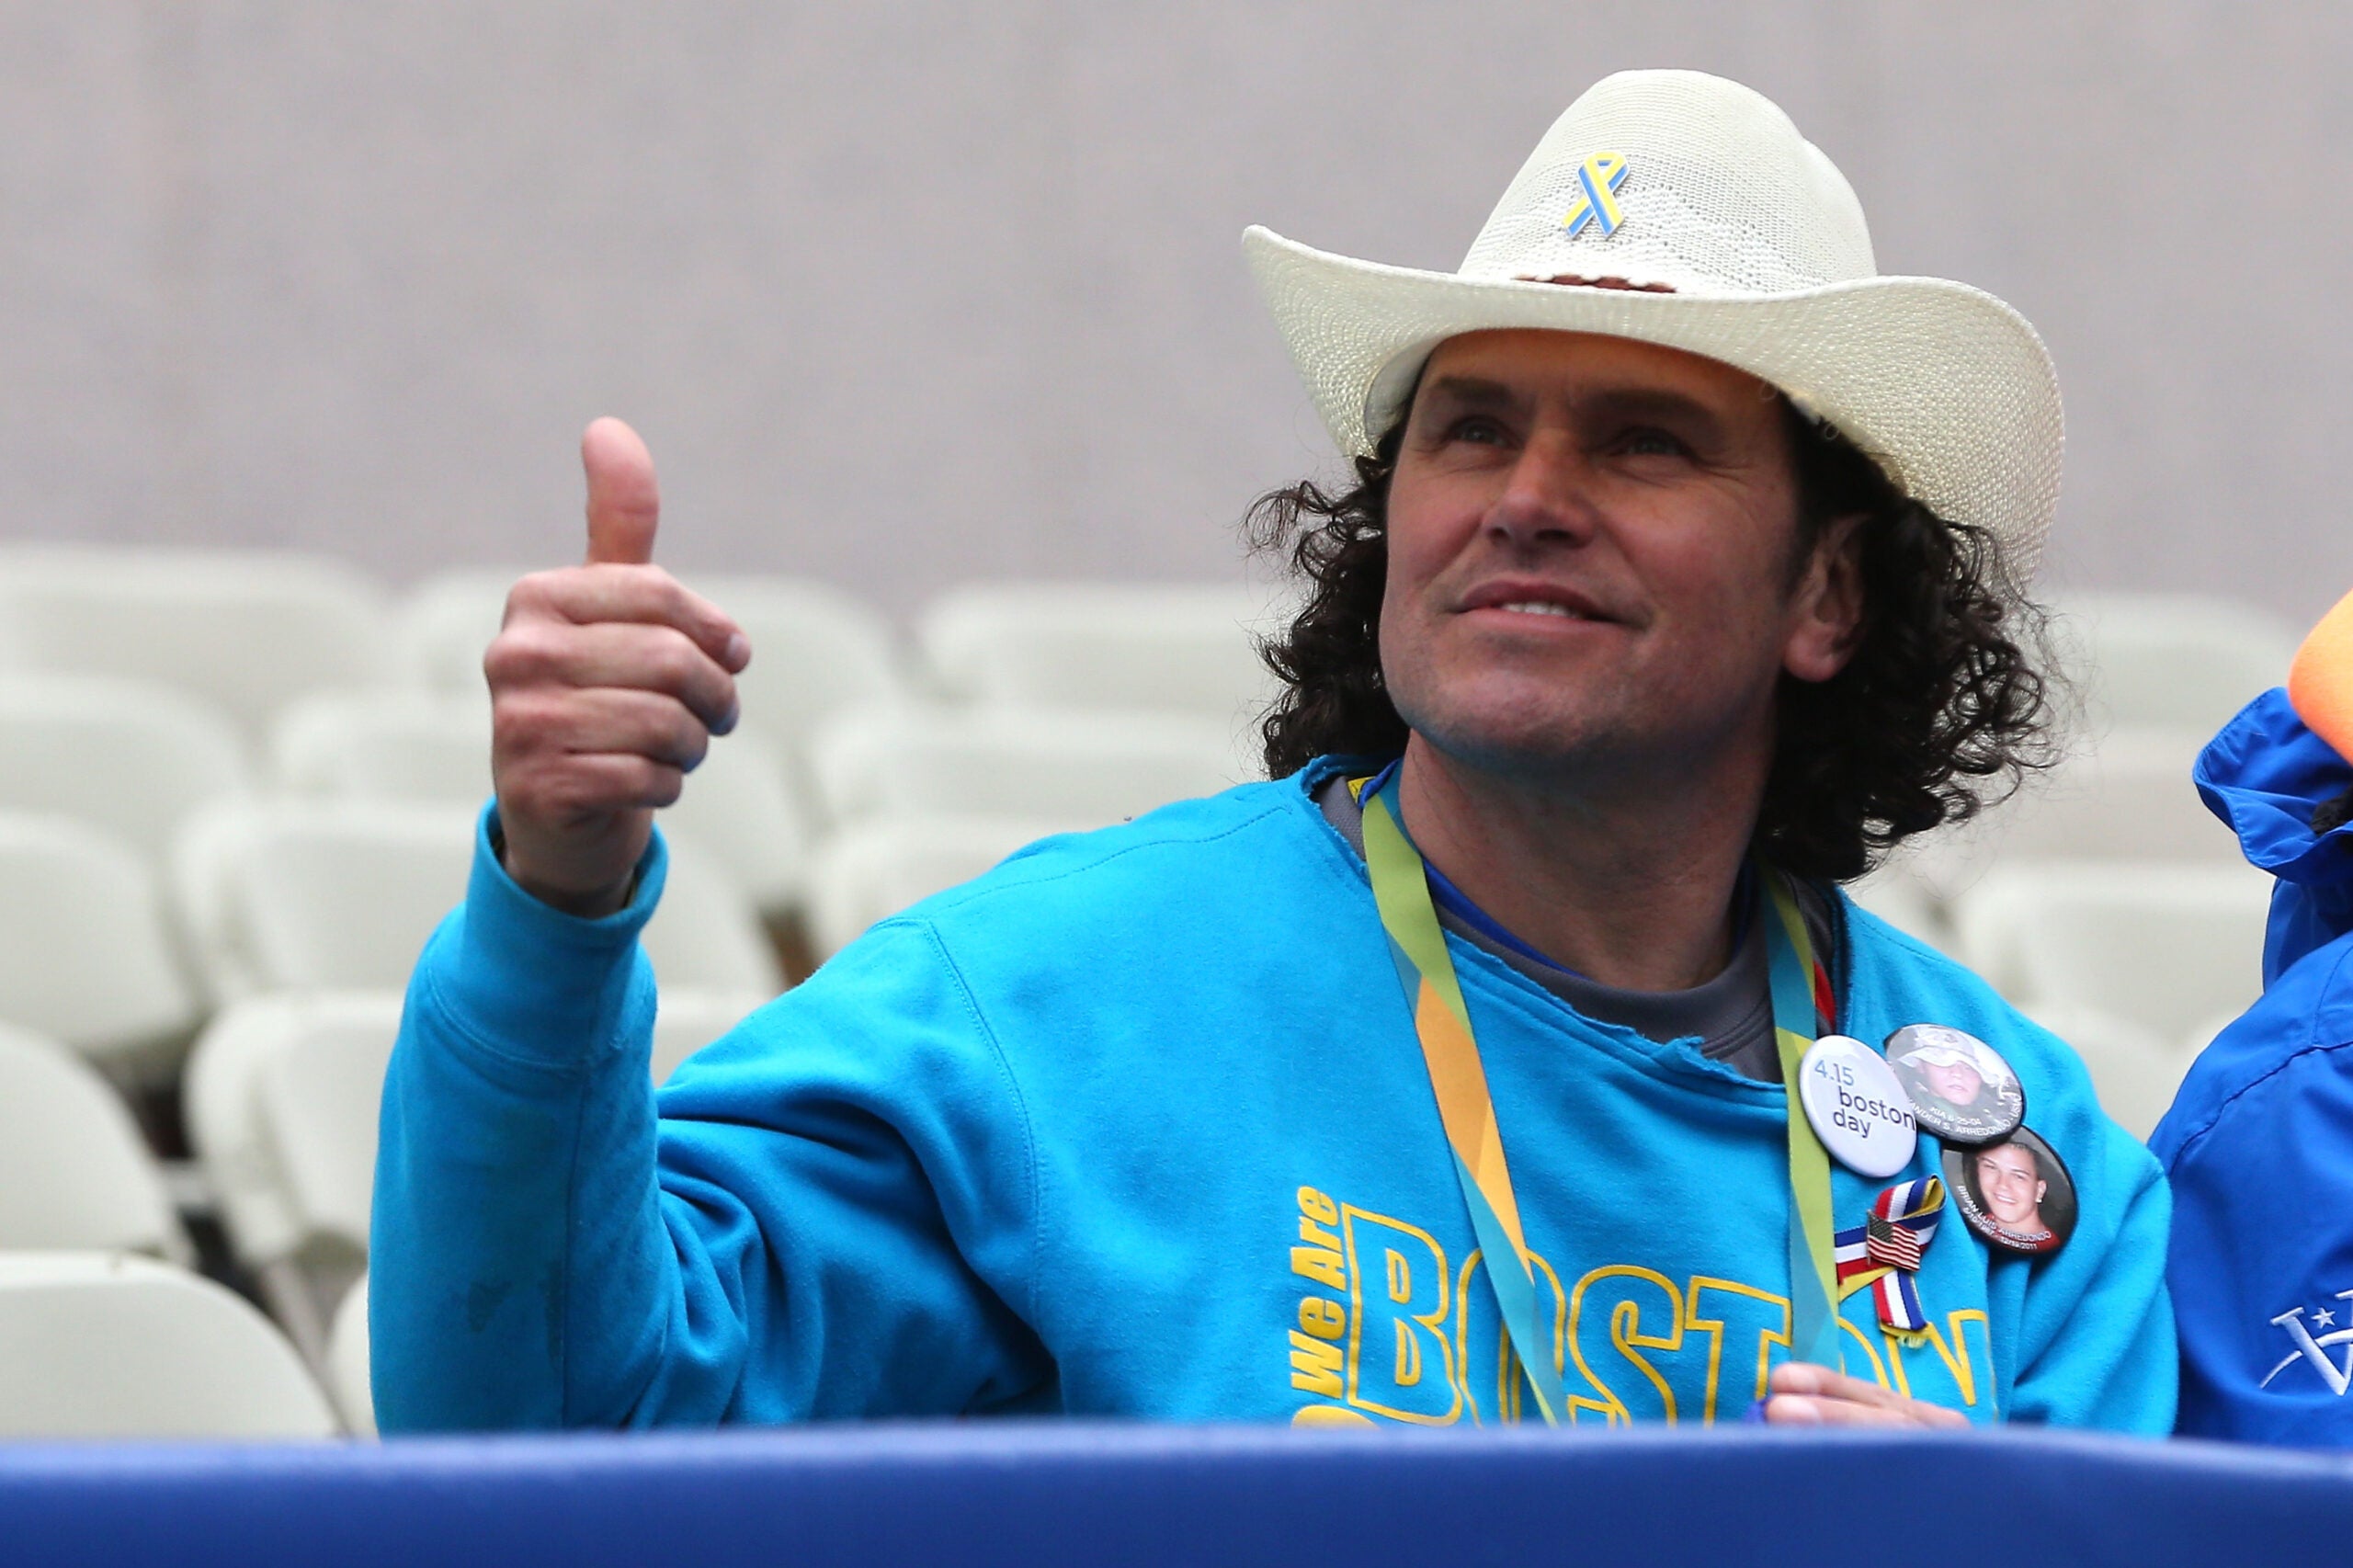 Carlos Arredondo will visit Pope Francis at the White House